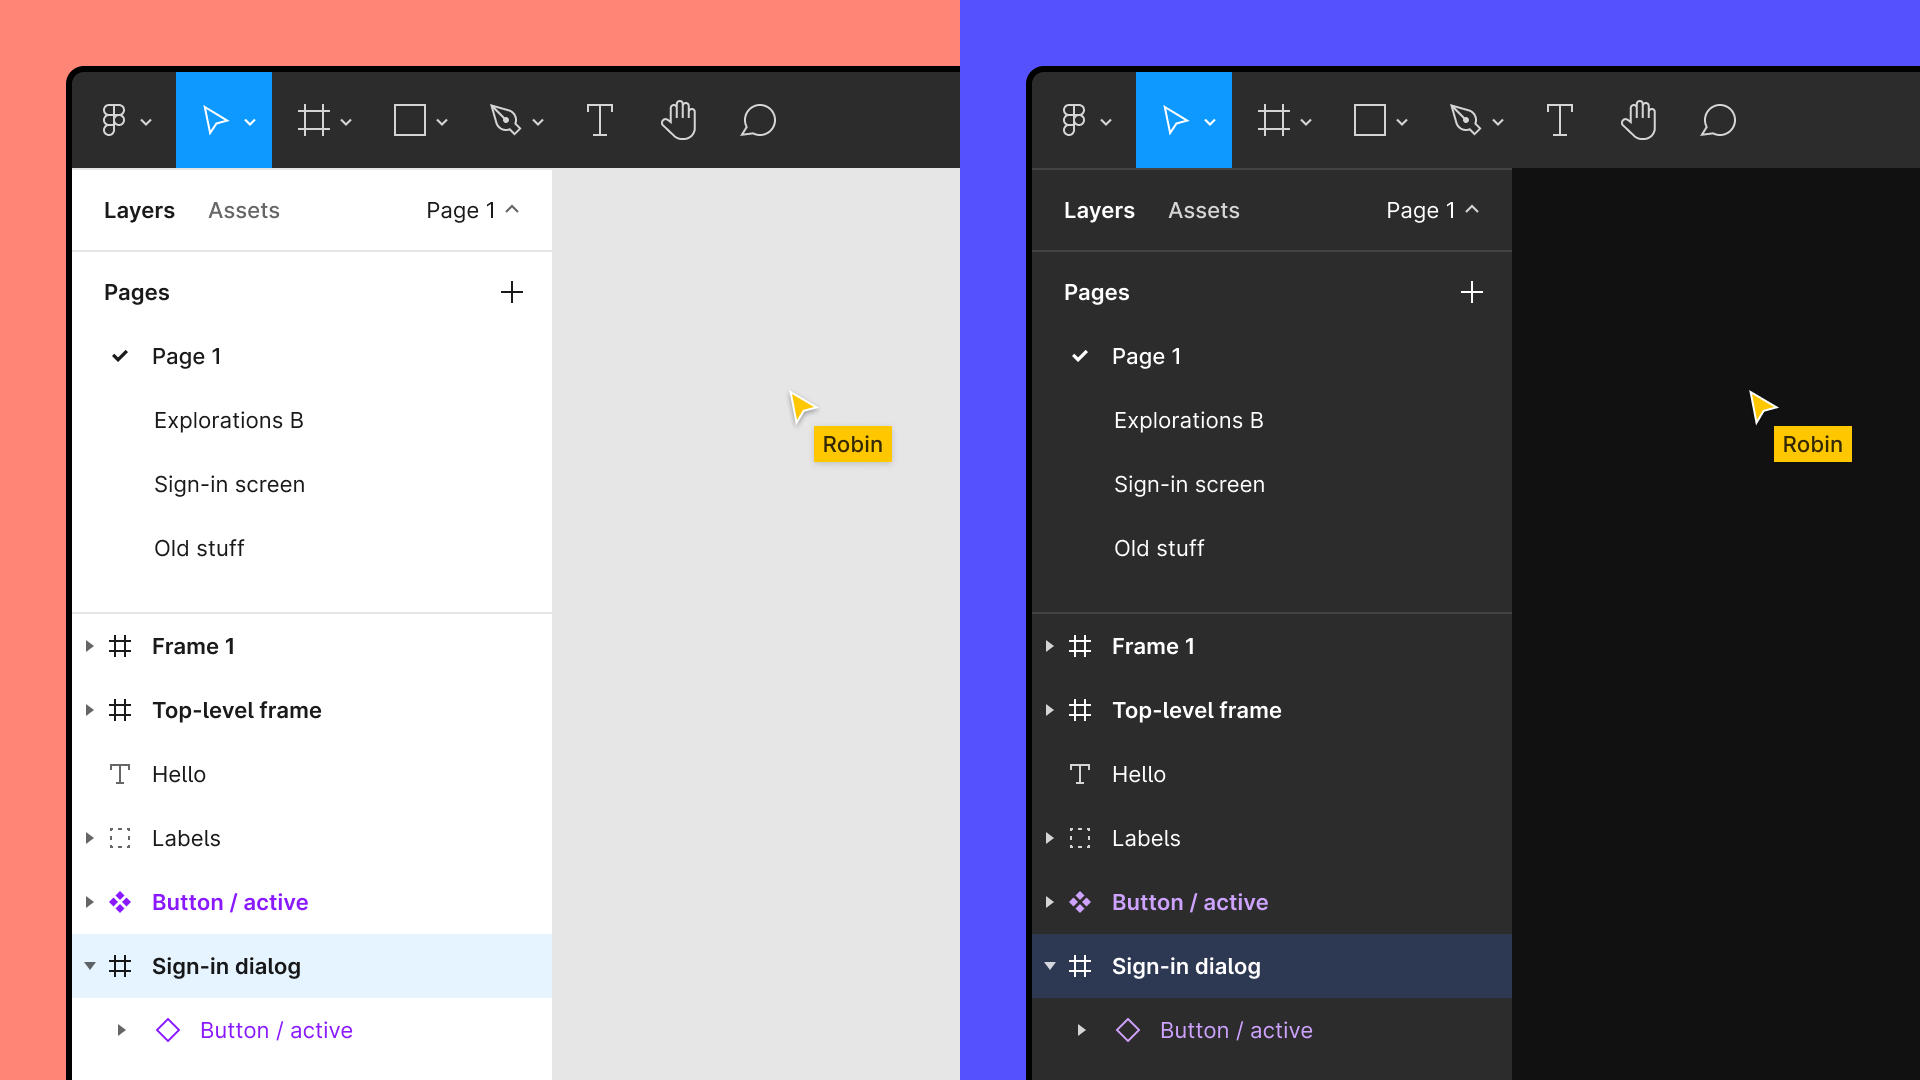 Side-by-side comparison of light and dark themes in a Figma design file